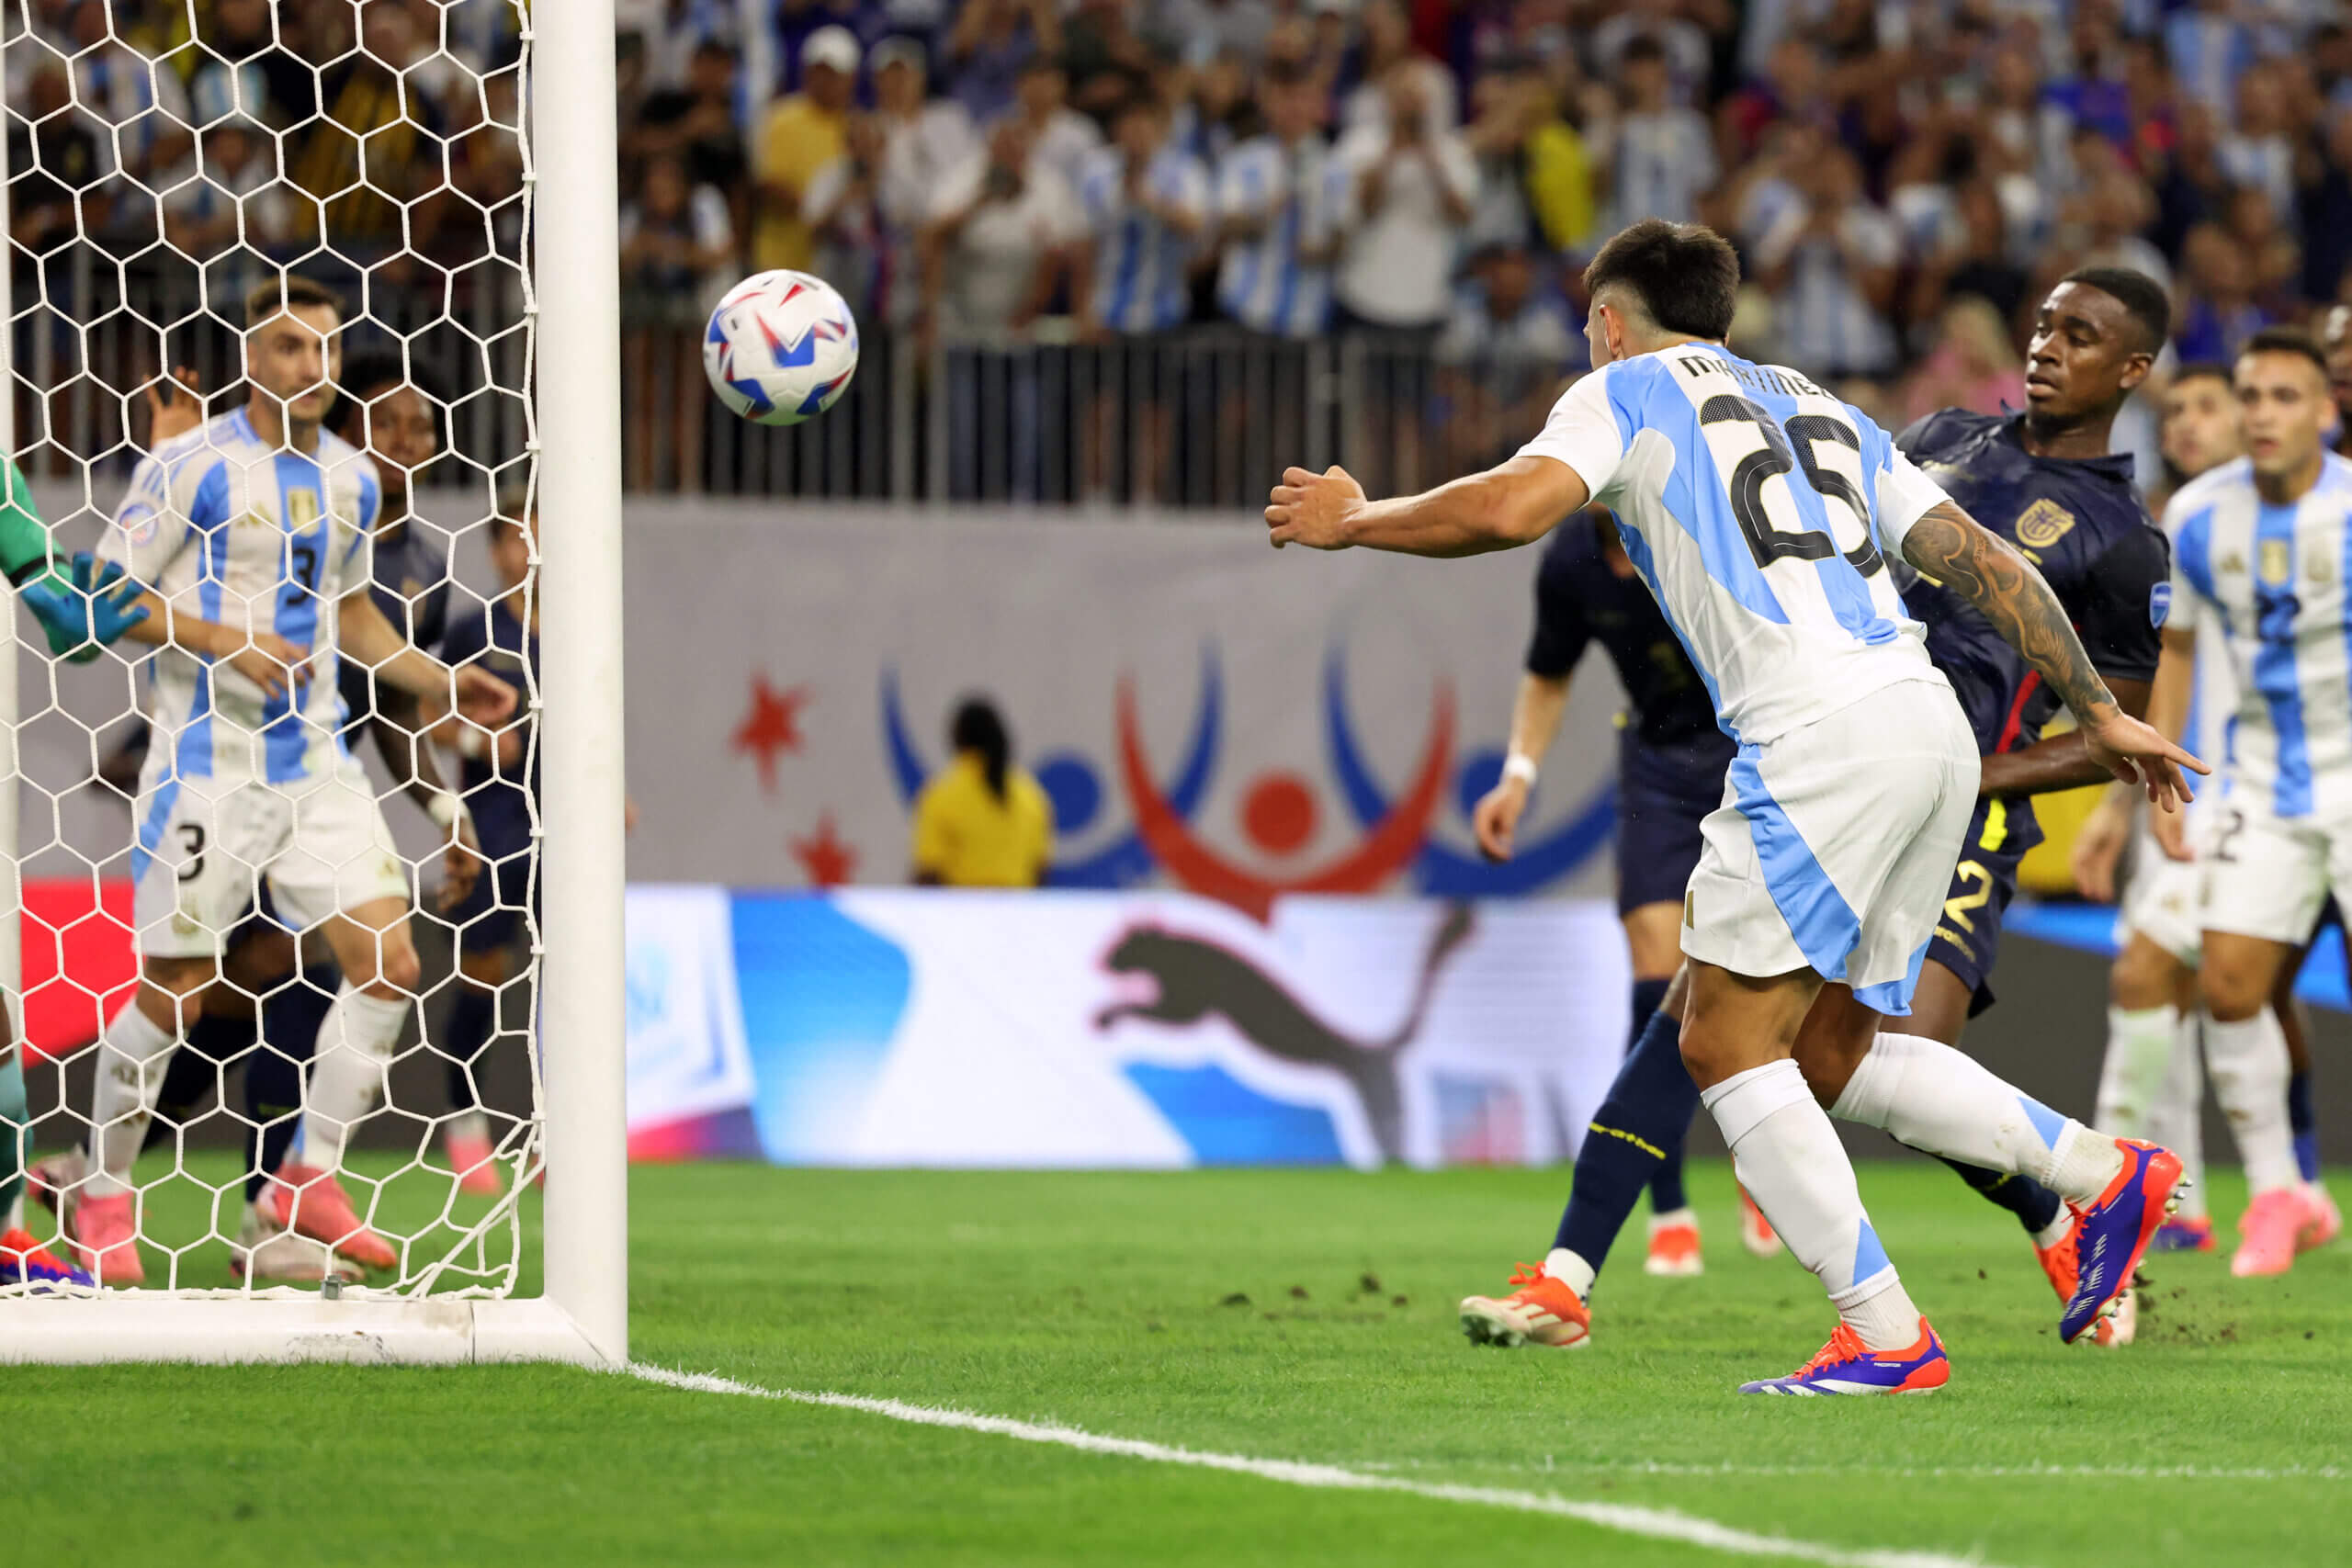 Argentina wins penalty shootout to reach semifinals, Messi misses from spot  - The Athletic